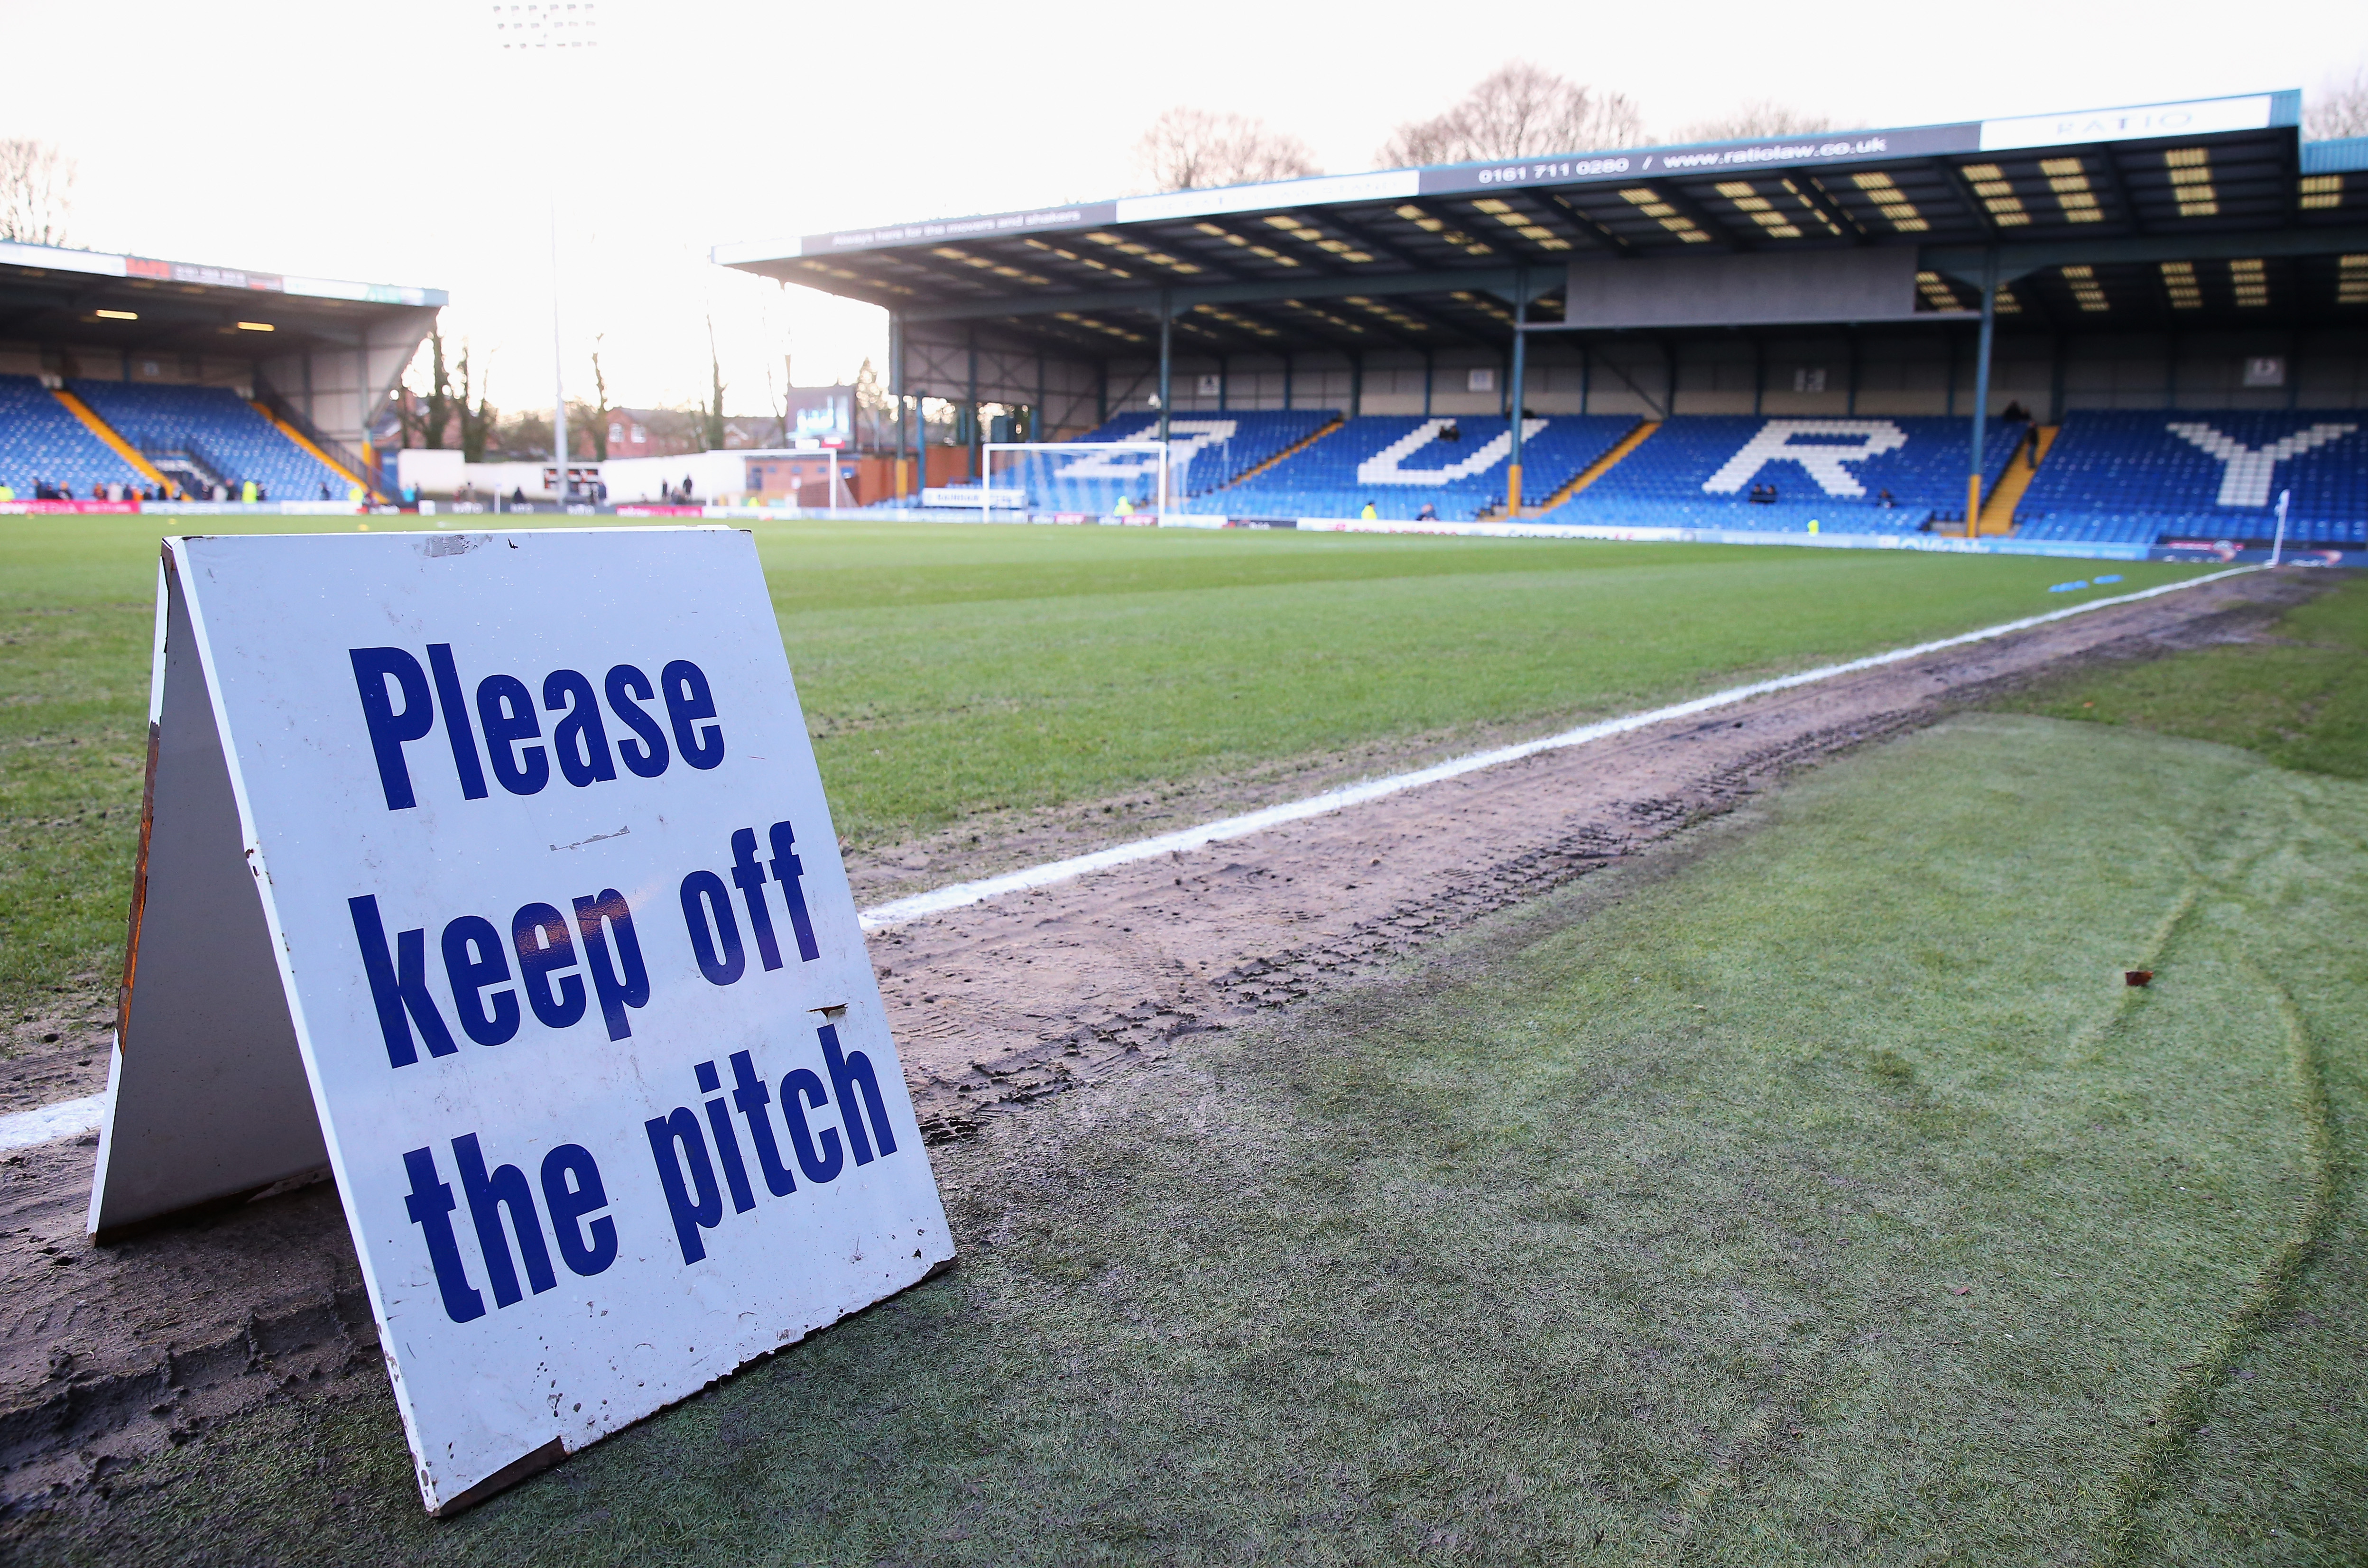 BURY, ENGLAND - JANUARY 30:  A general view of the stadium prior to the Emirates FA Cup fourth round match at between Bury and Hull City at Gigg Lane on January 30, 2016 in Bury, England.  (Photo by Alex Livesey/Getty Images)